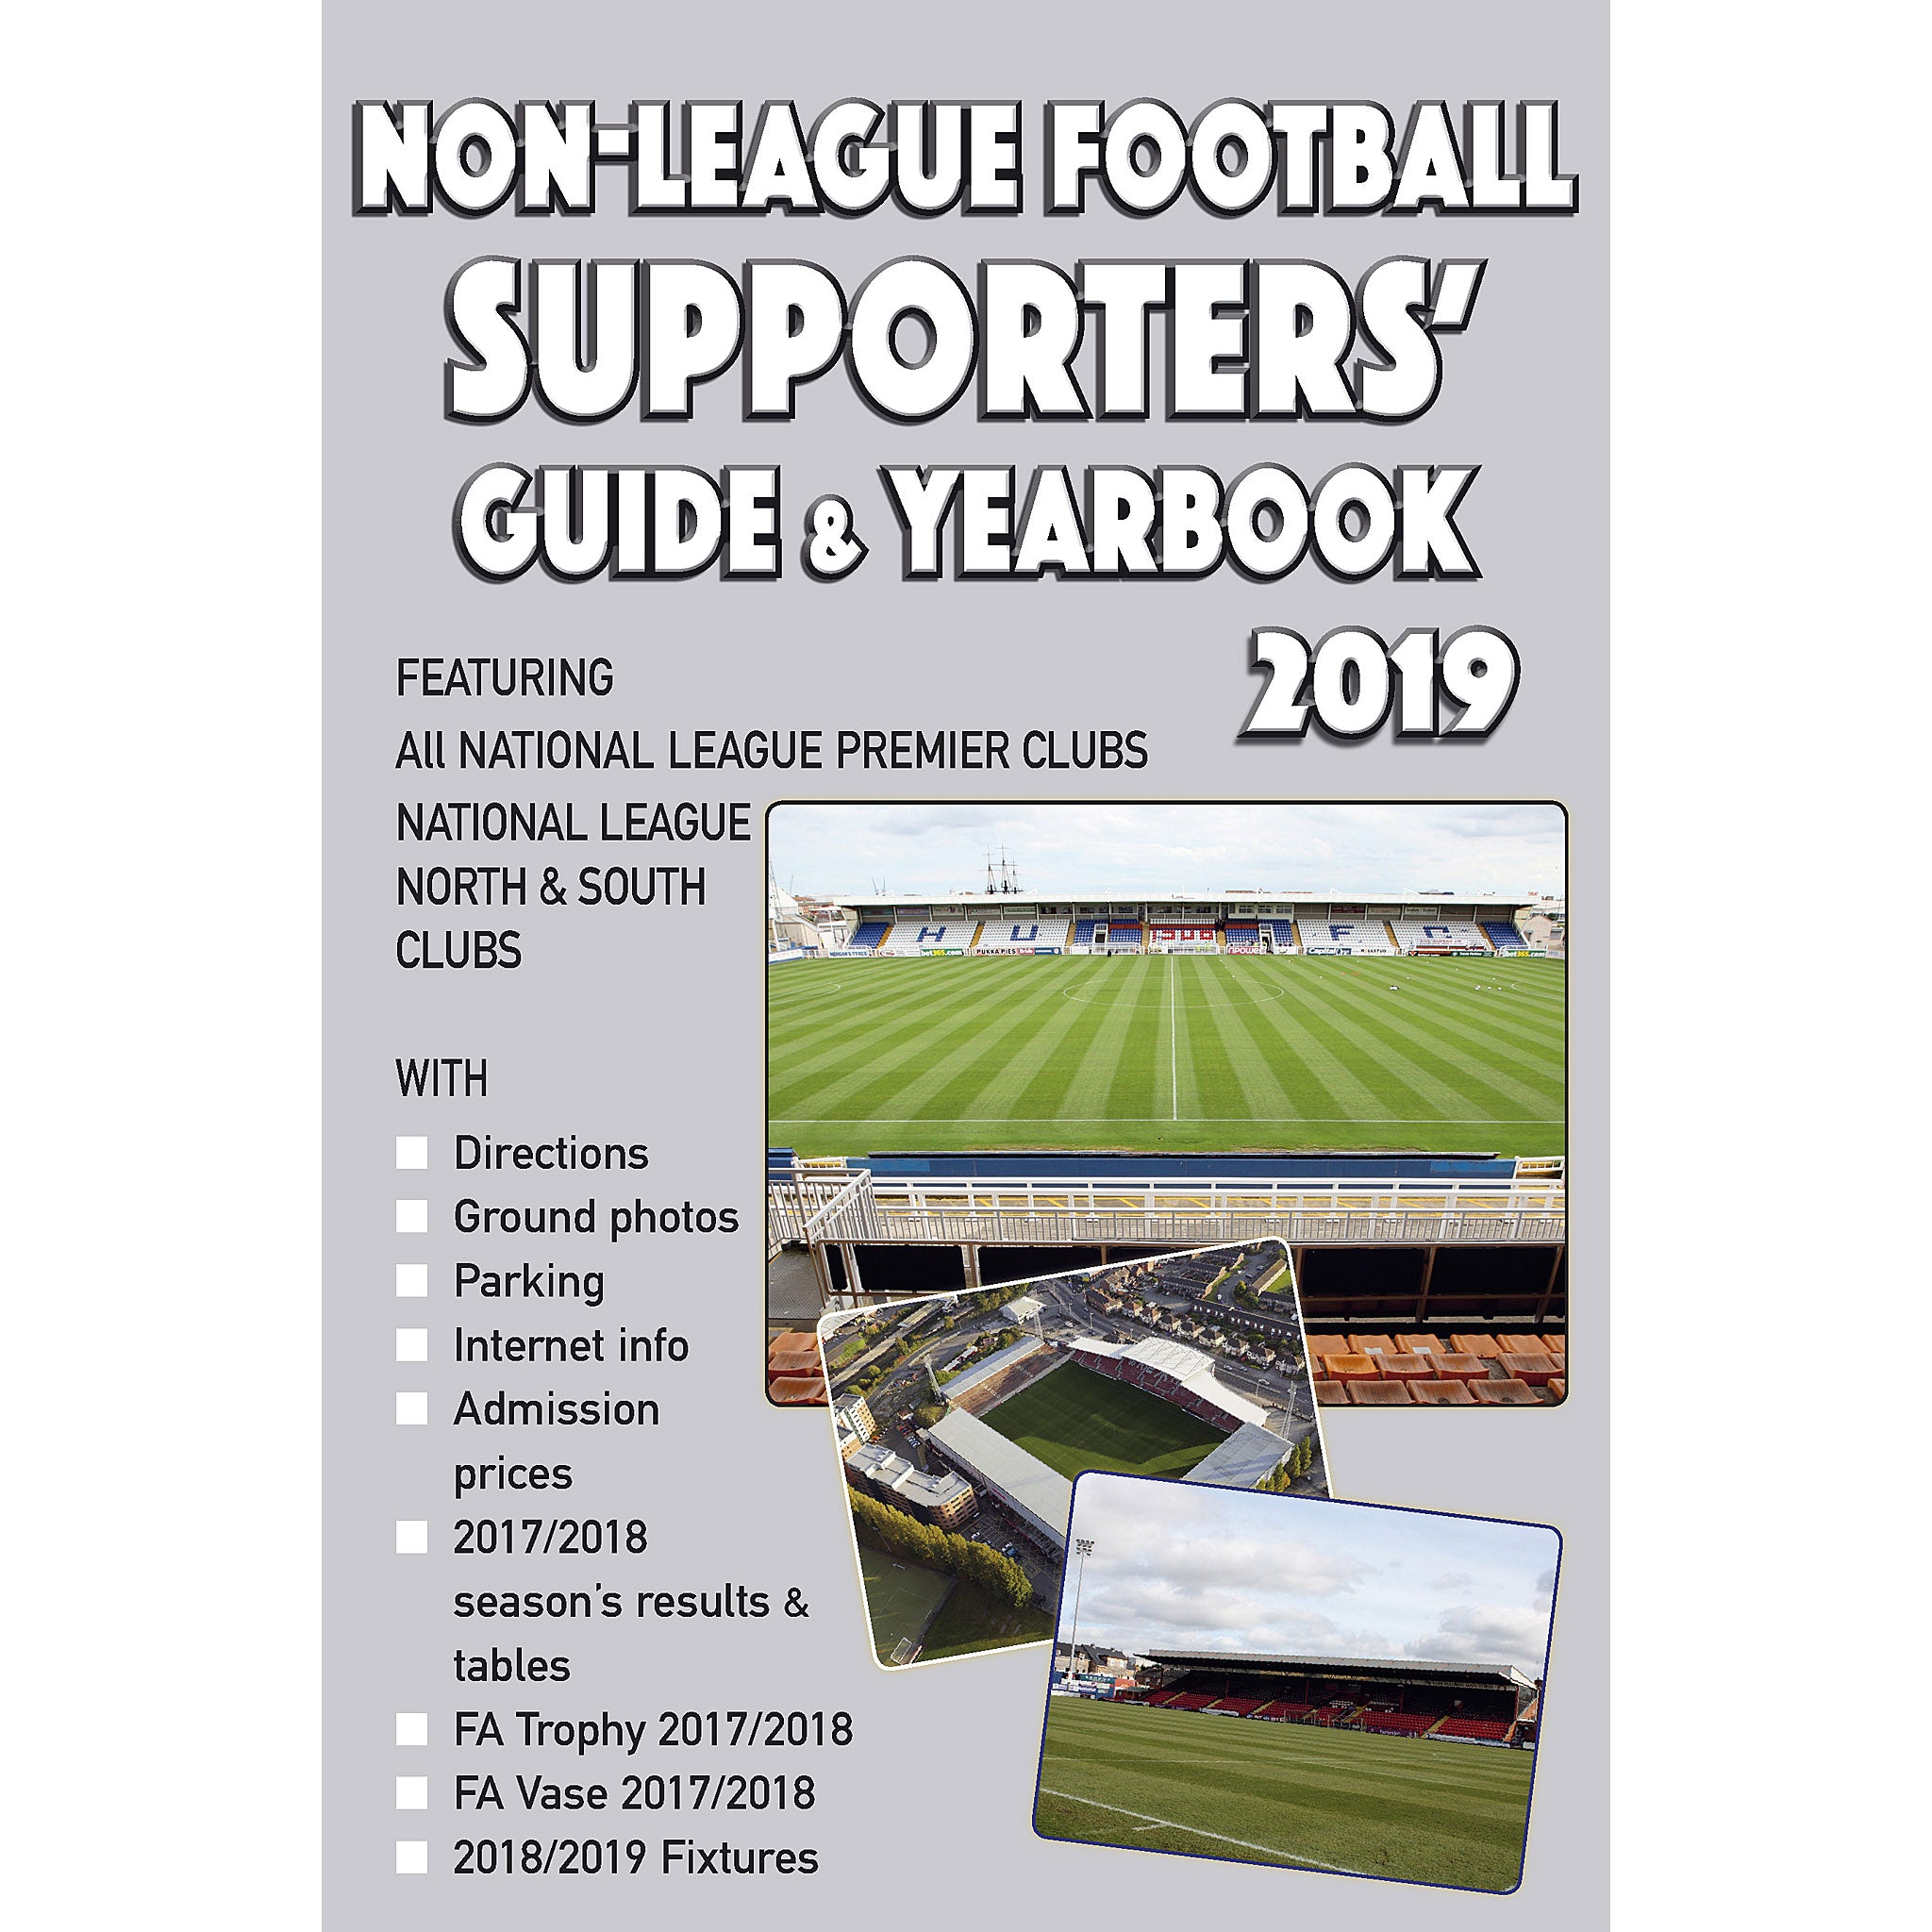 Non-League Football Supporters' Guide & Yearbook 2019